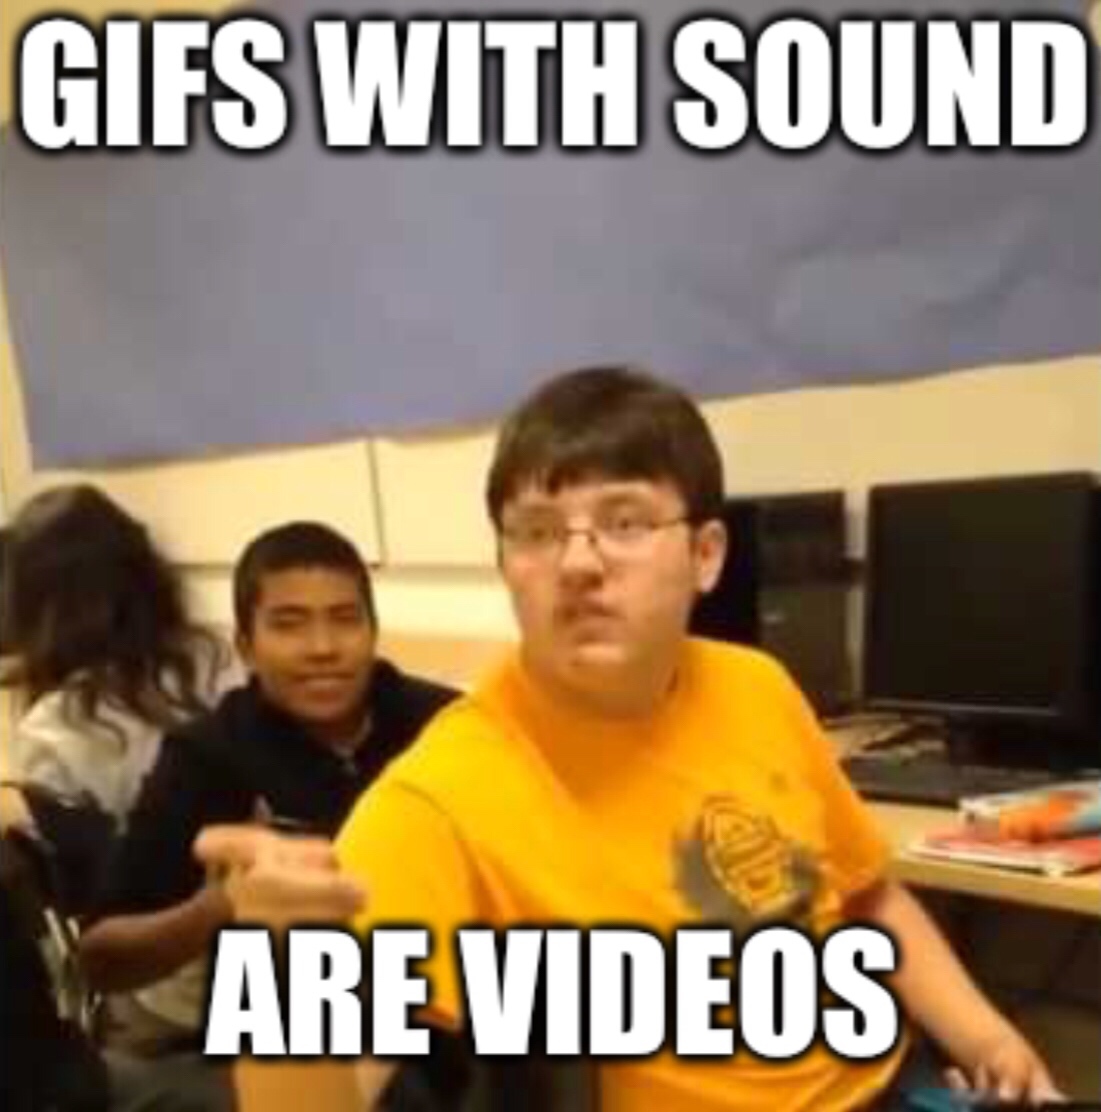 you know what im about to say - Gifs With Sound Are Videos